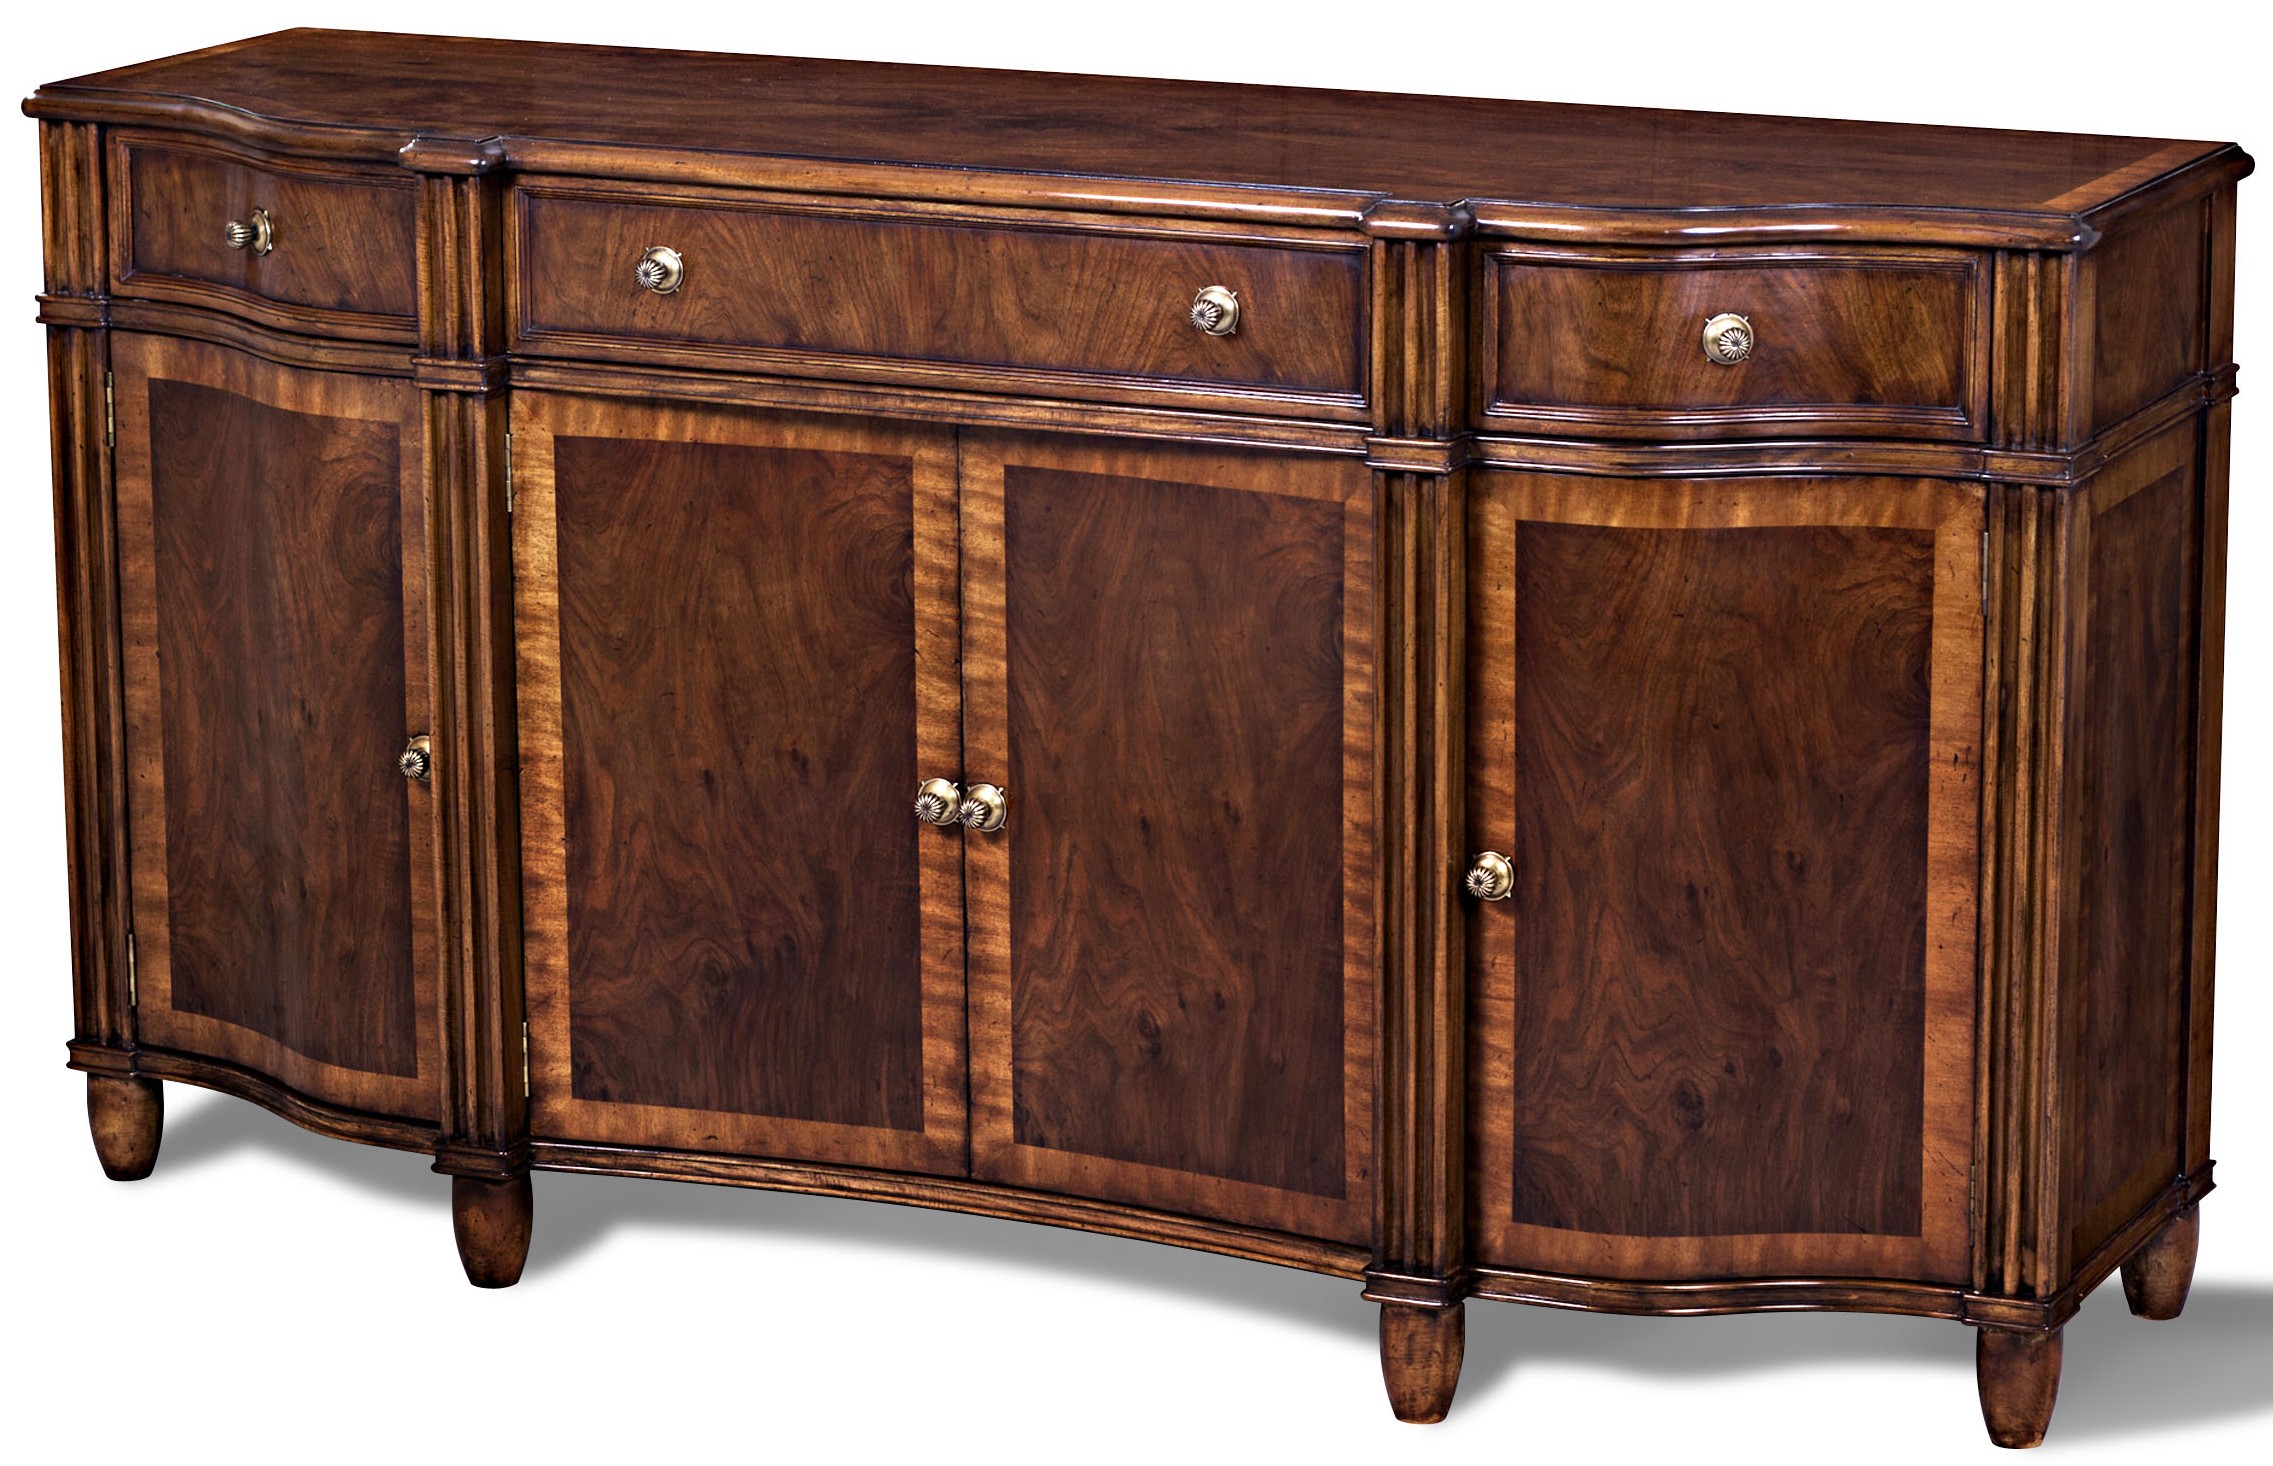 Breakfronts & China Cabinets European Swirl Sideboard Table